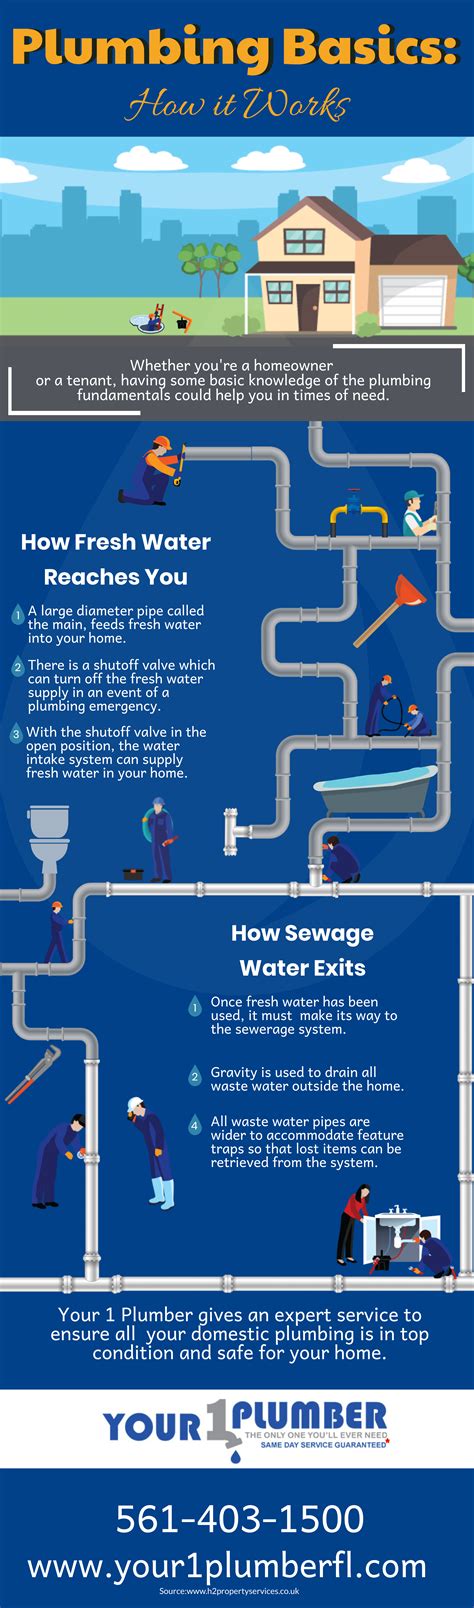 How much is a plumber. Jan 9, 2024 · An emergency plumber usually costs between $50 to $125 per hour or $80 per hour on average. This is slightly higher than the cost of a standard plumber at $50 to $80 per hour. The increased price ... 